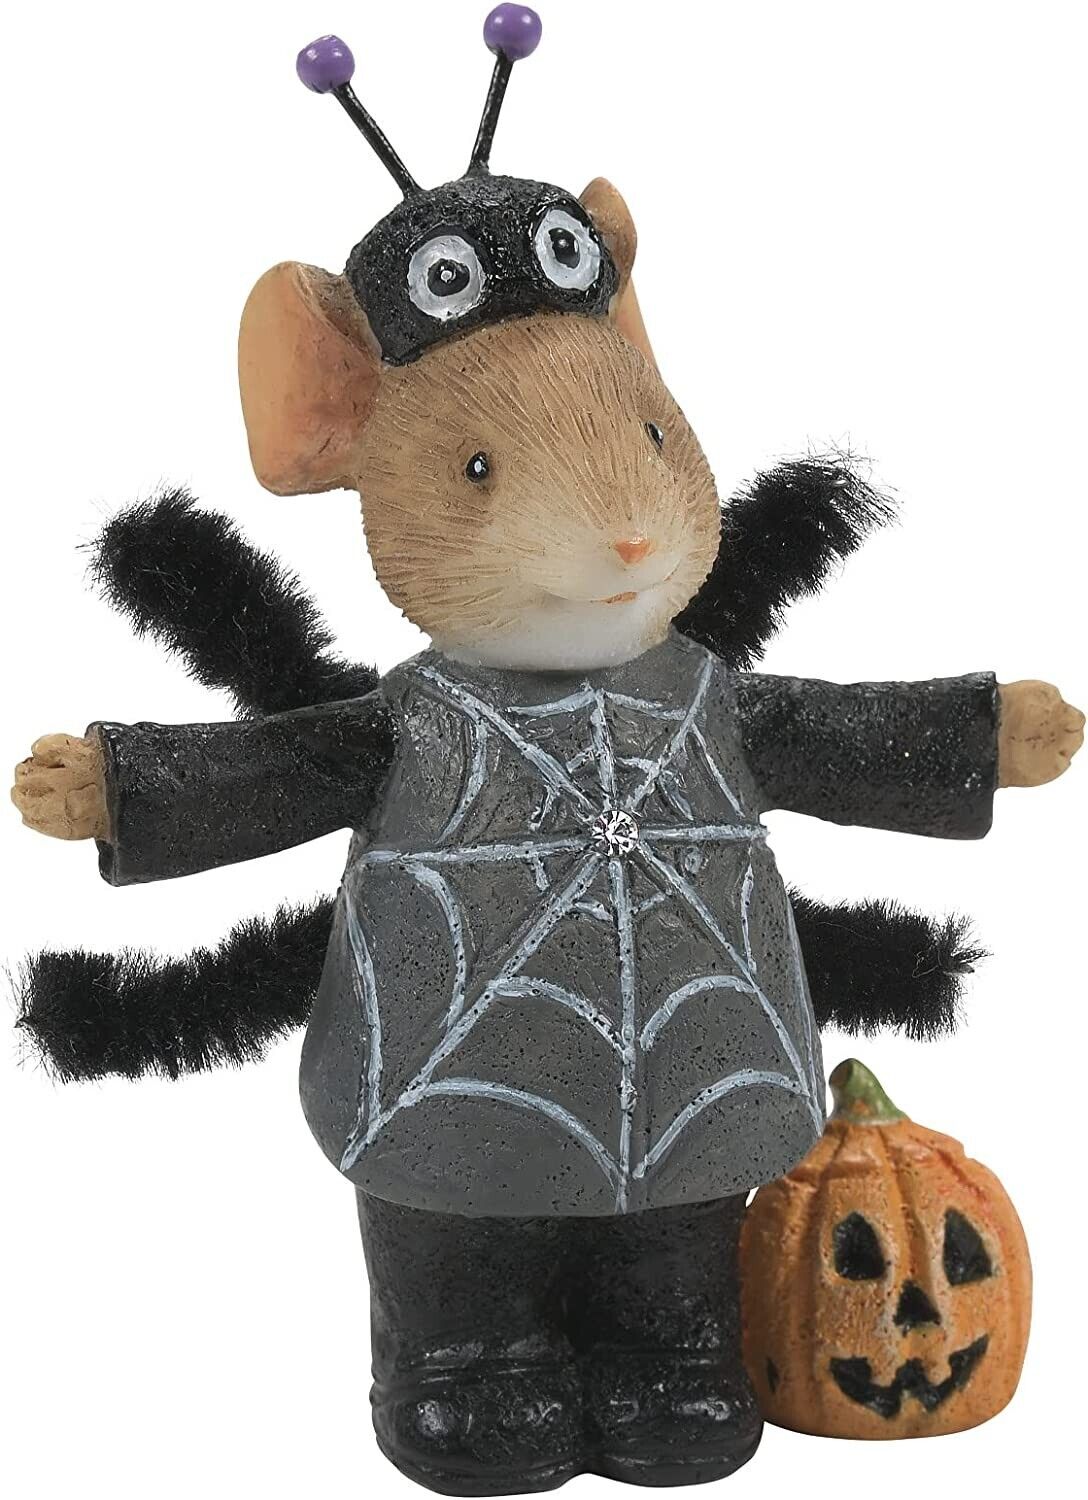 Spider Costume mouse 6012638 Tails with Heart Halloween mice Enesco figurine Z